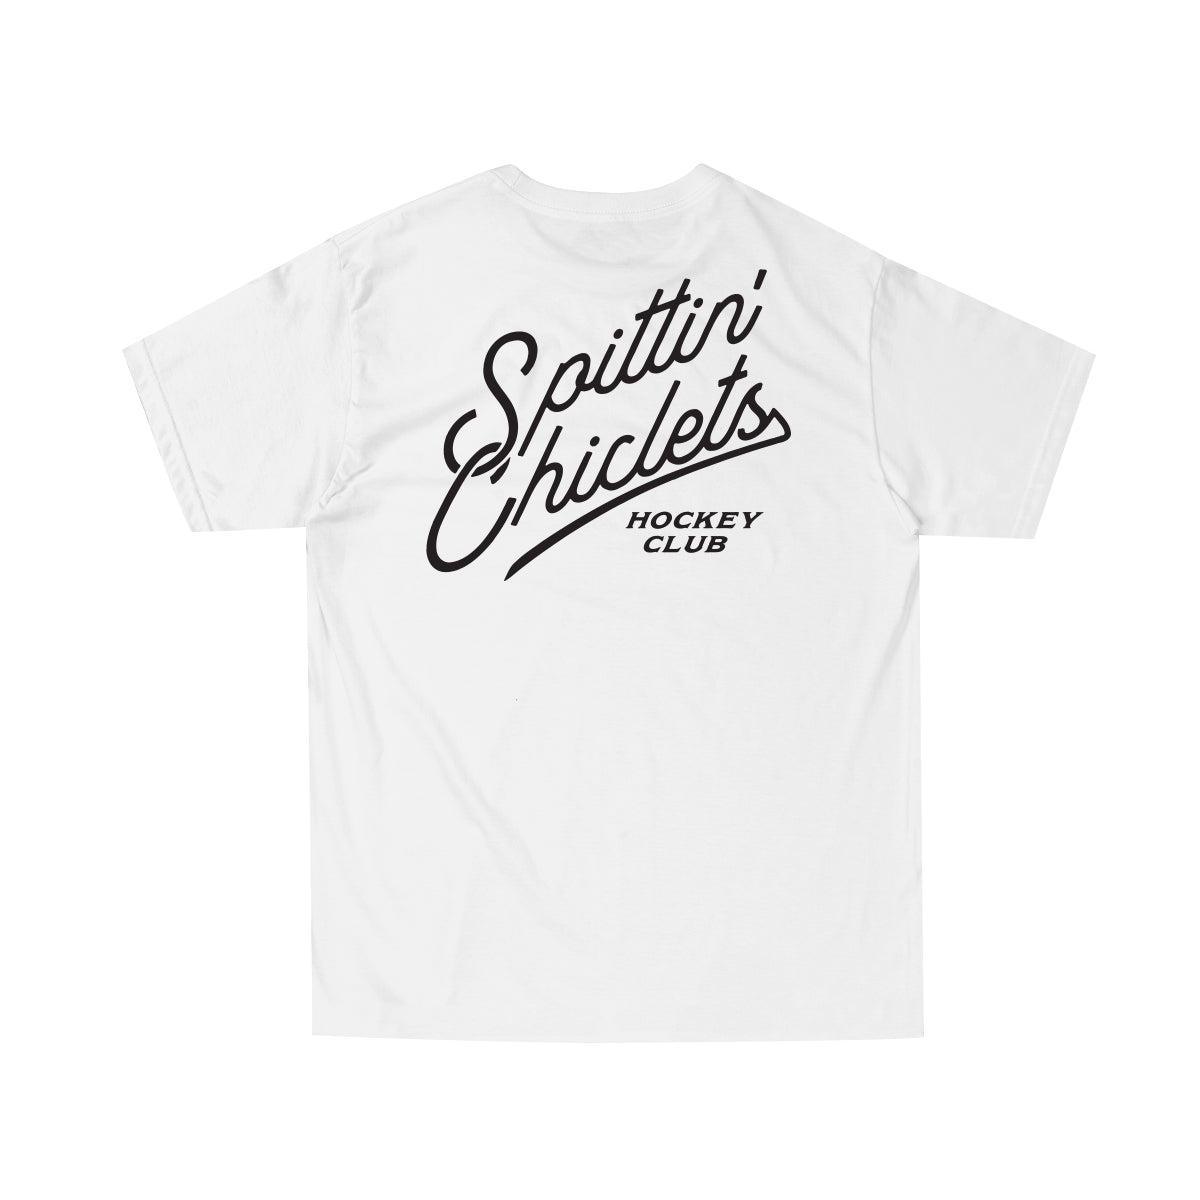 Spittin Chiclets Stacked Script Tee